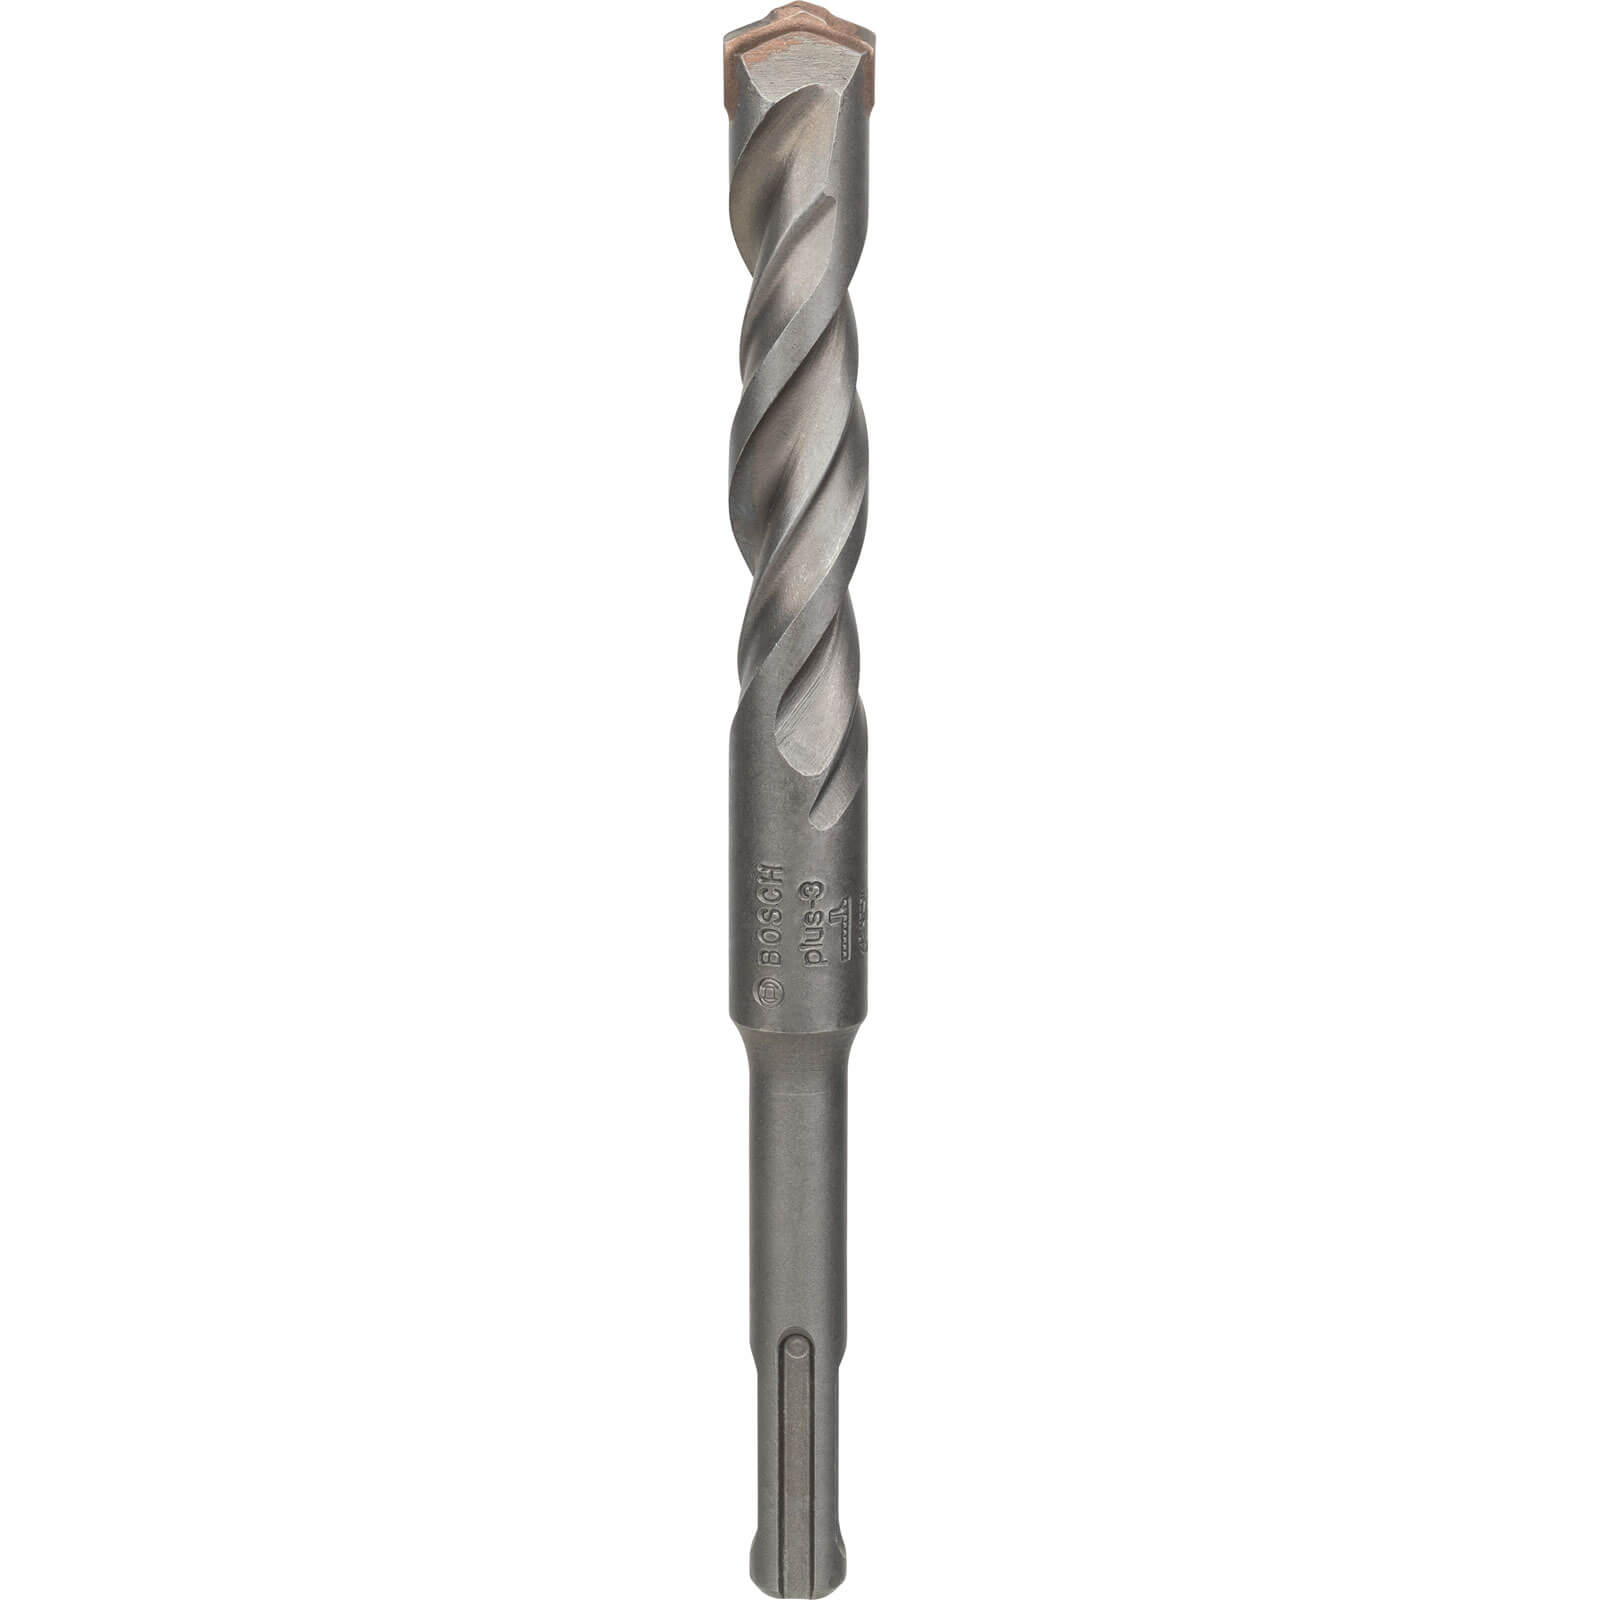 Image of Bosch Series 3 SDS Plus Masonry Drill Bit 15mm 160mm Pack of 1